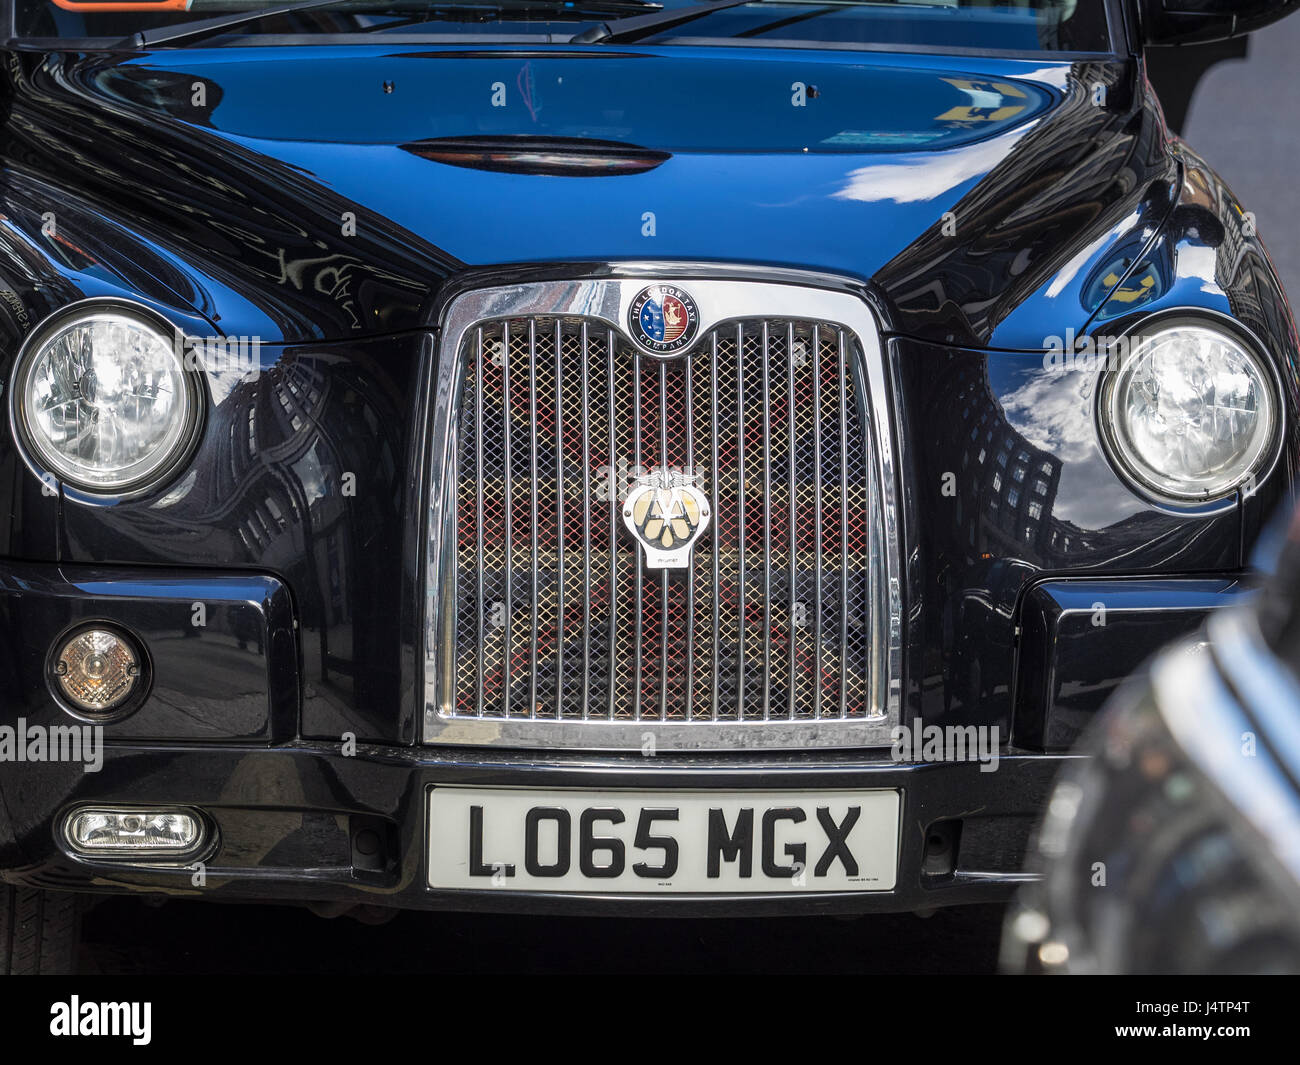 A London Taxi (Black Cab) with a distinctive Union Jack flag design on the radiator grille. Stock Photo